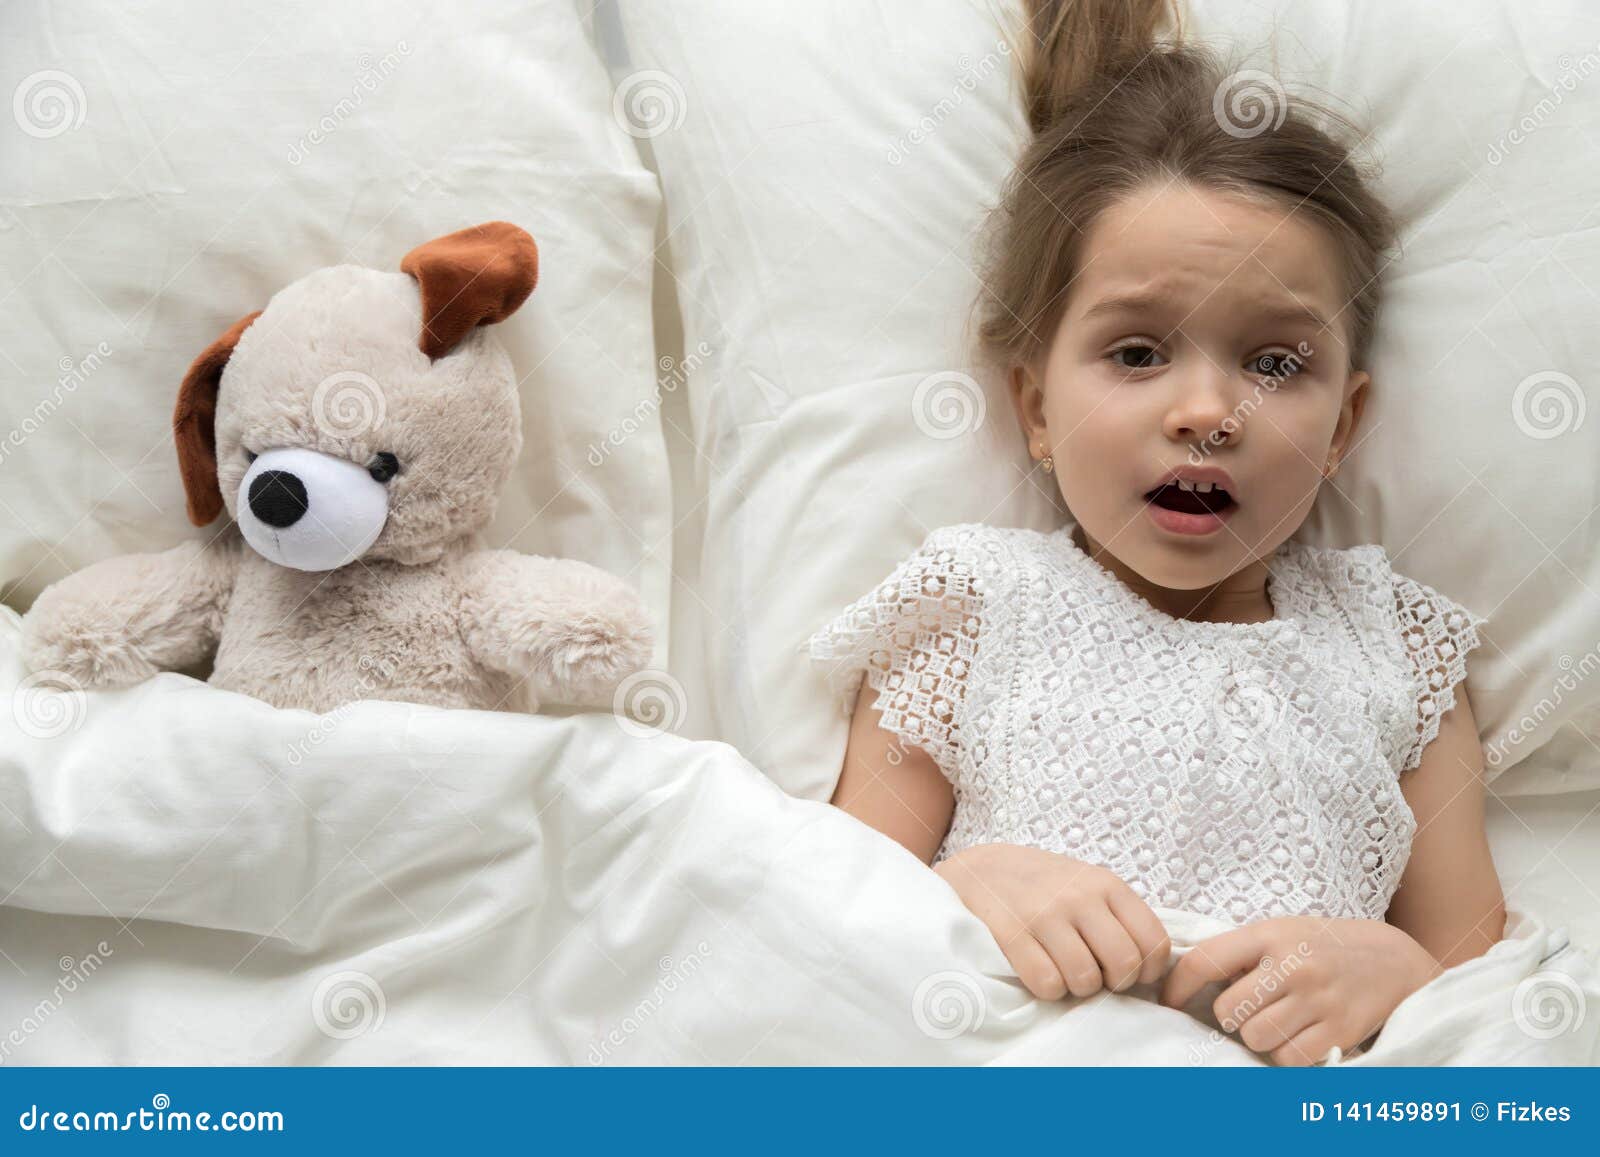 scared child lying in bed with toy afraid of nightmare